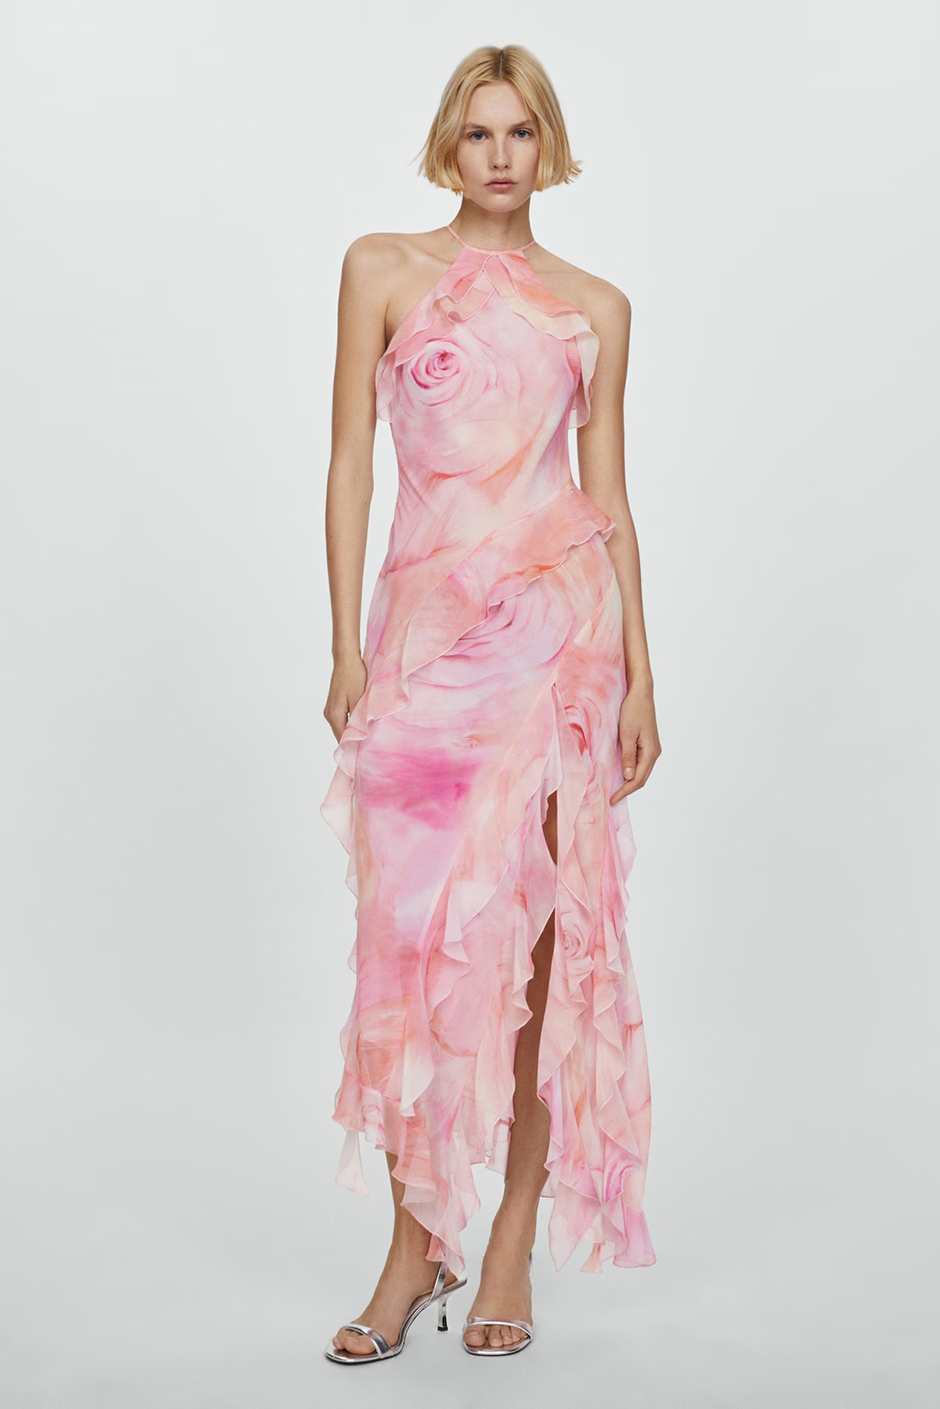 Pink wedding guest dress from Mango with floral design and ruffles